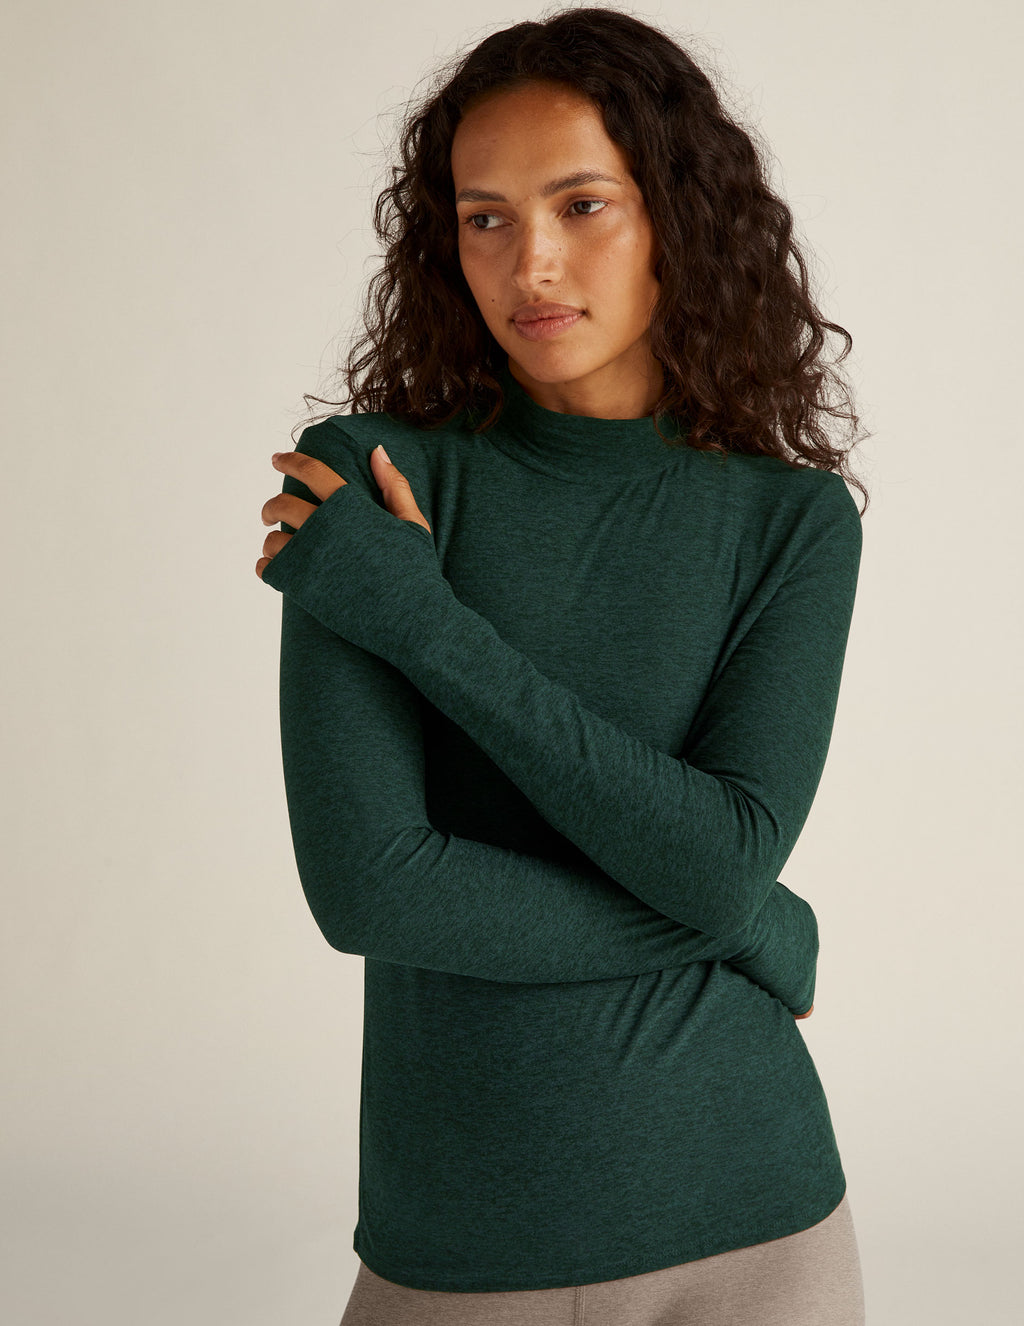 Featherweight Moving On Pullover Featured Image